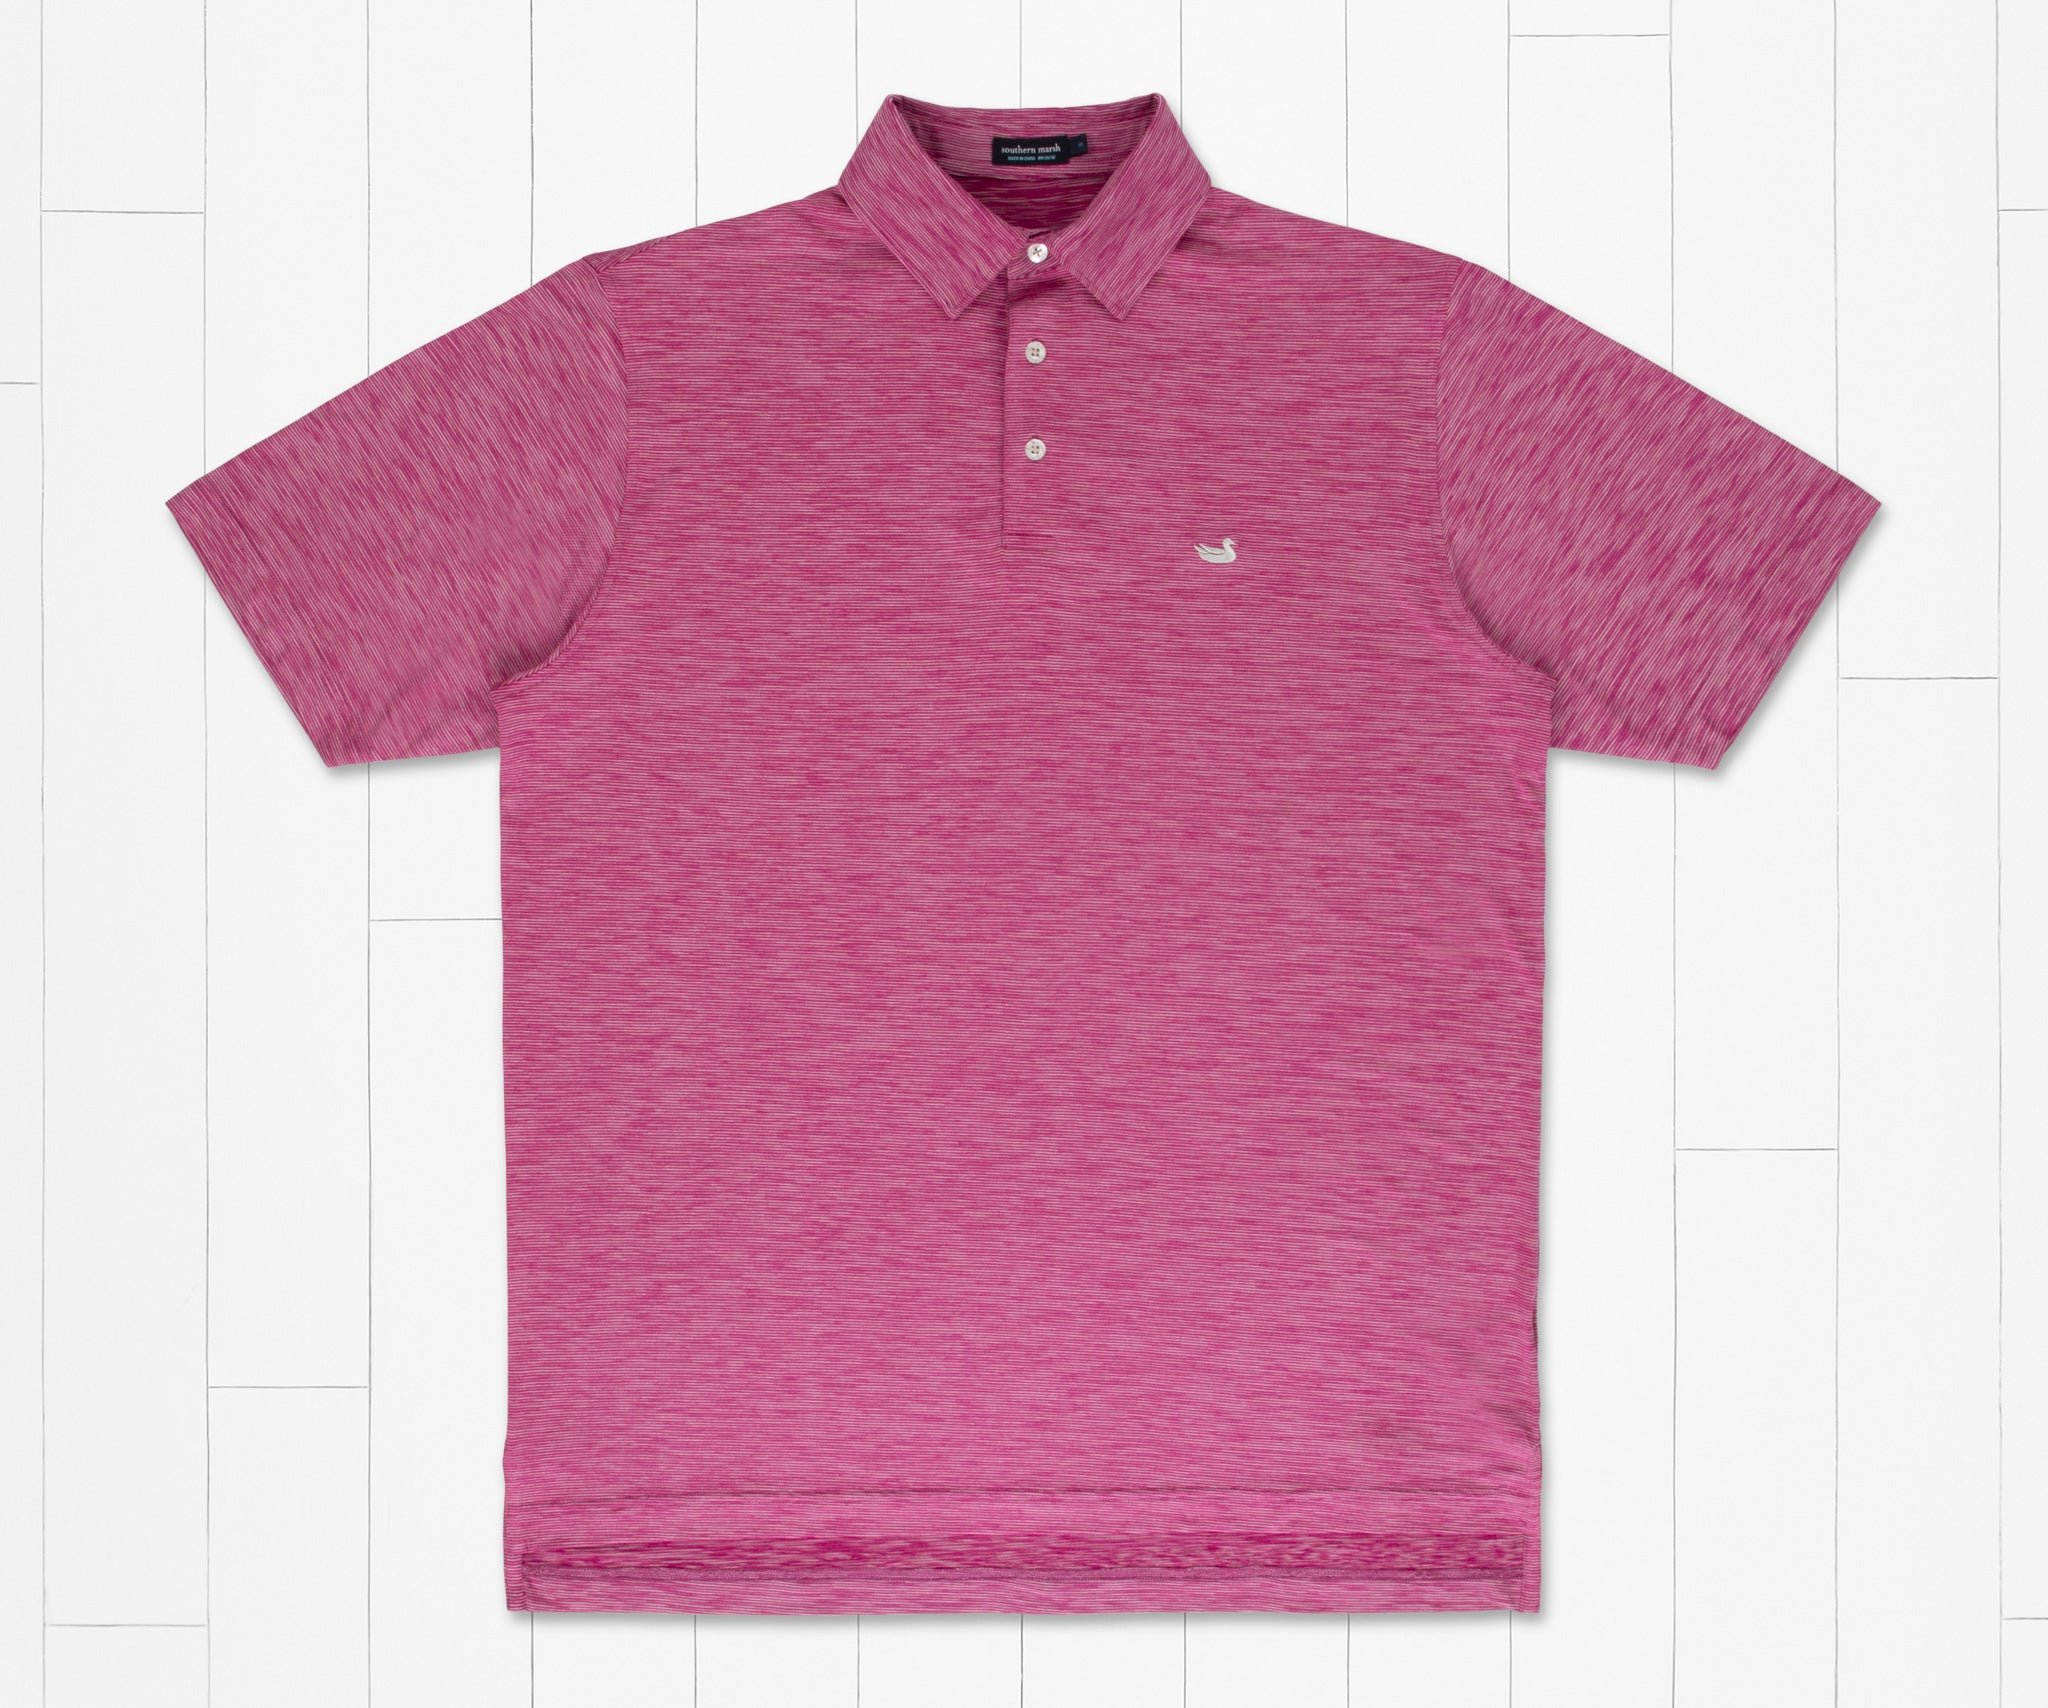 Southern Marsh Berkeley Striped Performance Polo in French Blue and Midnight Grey